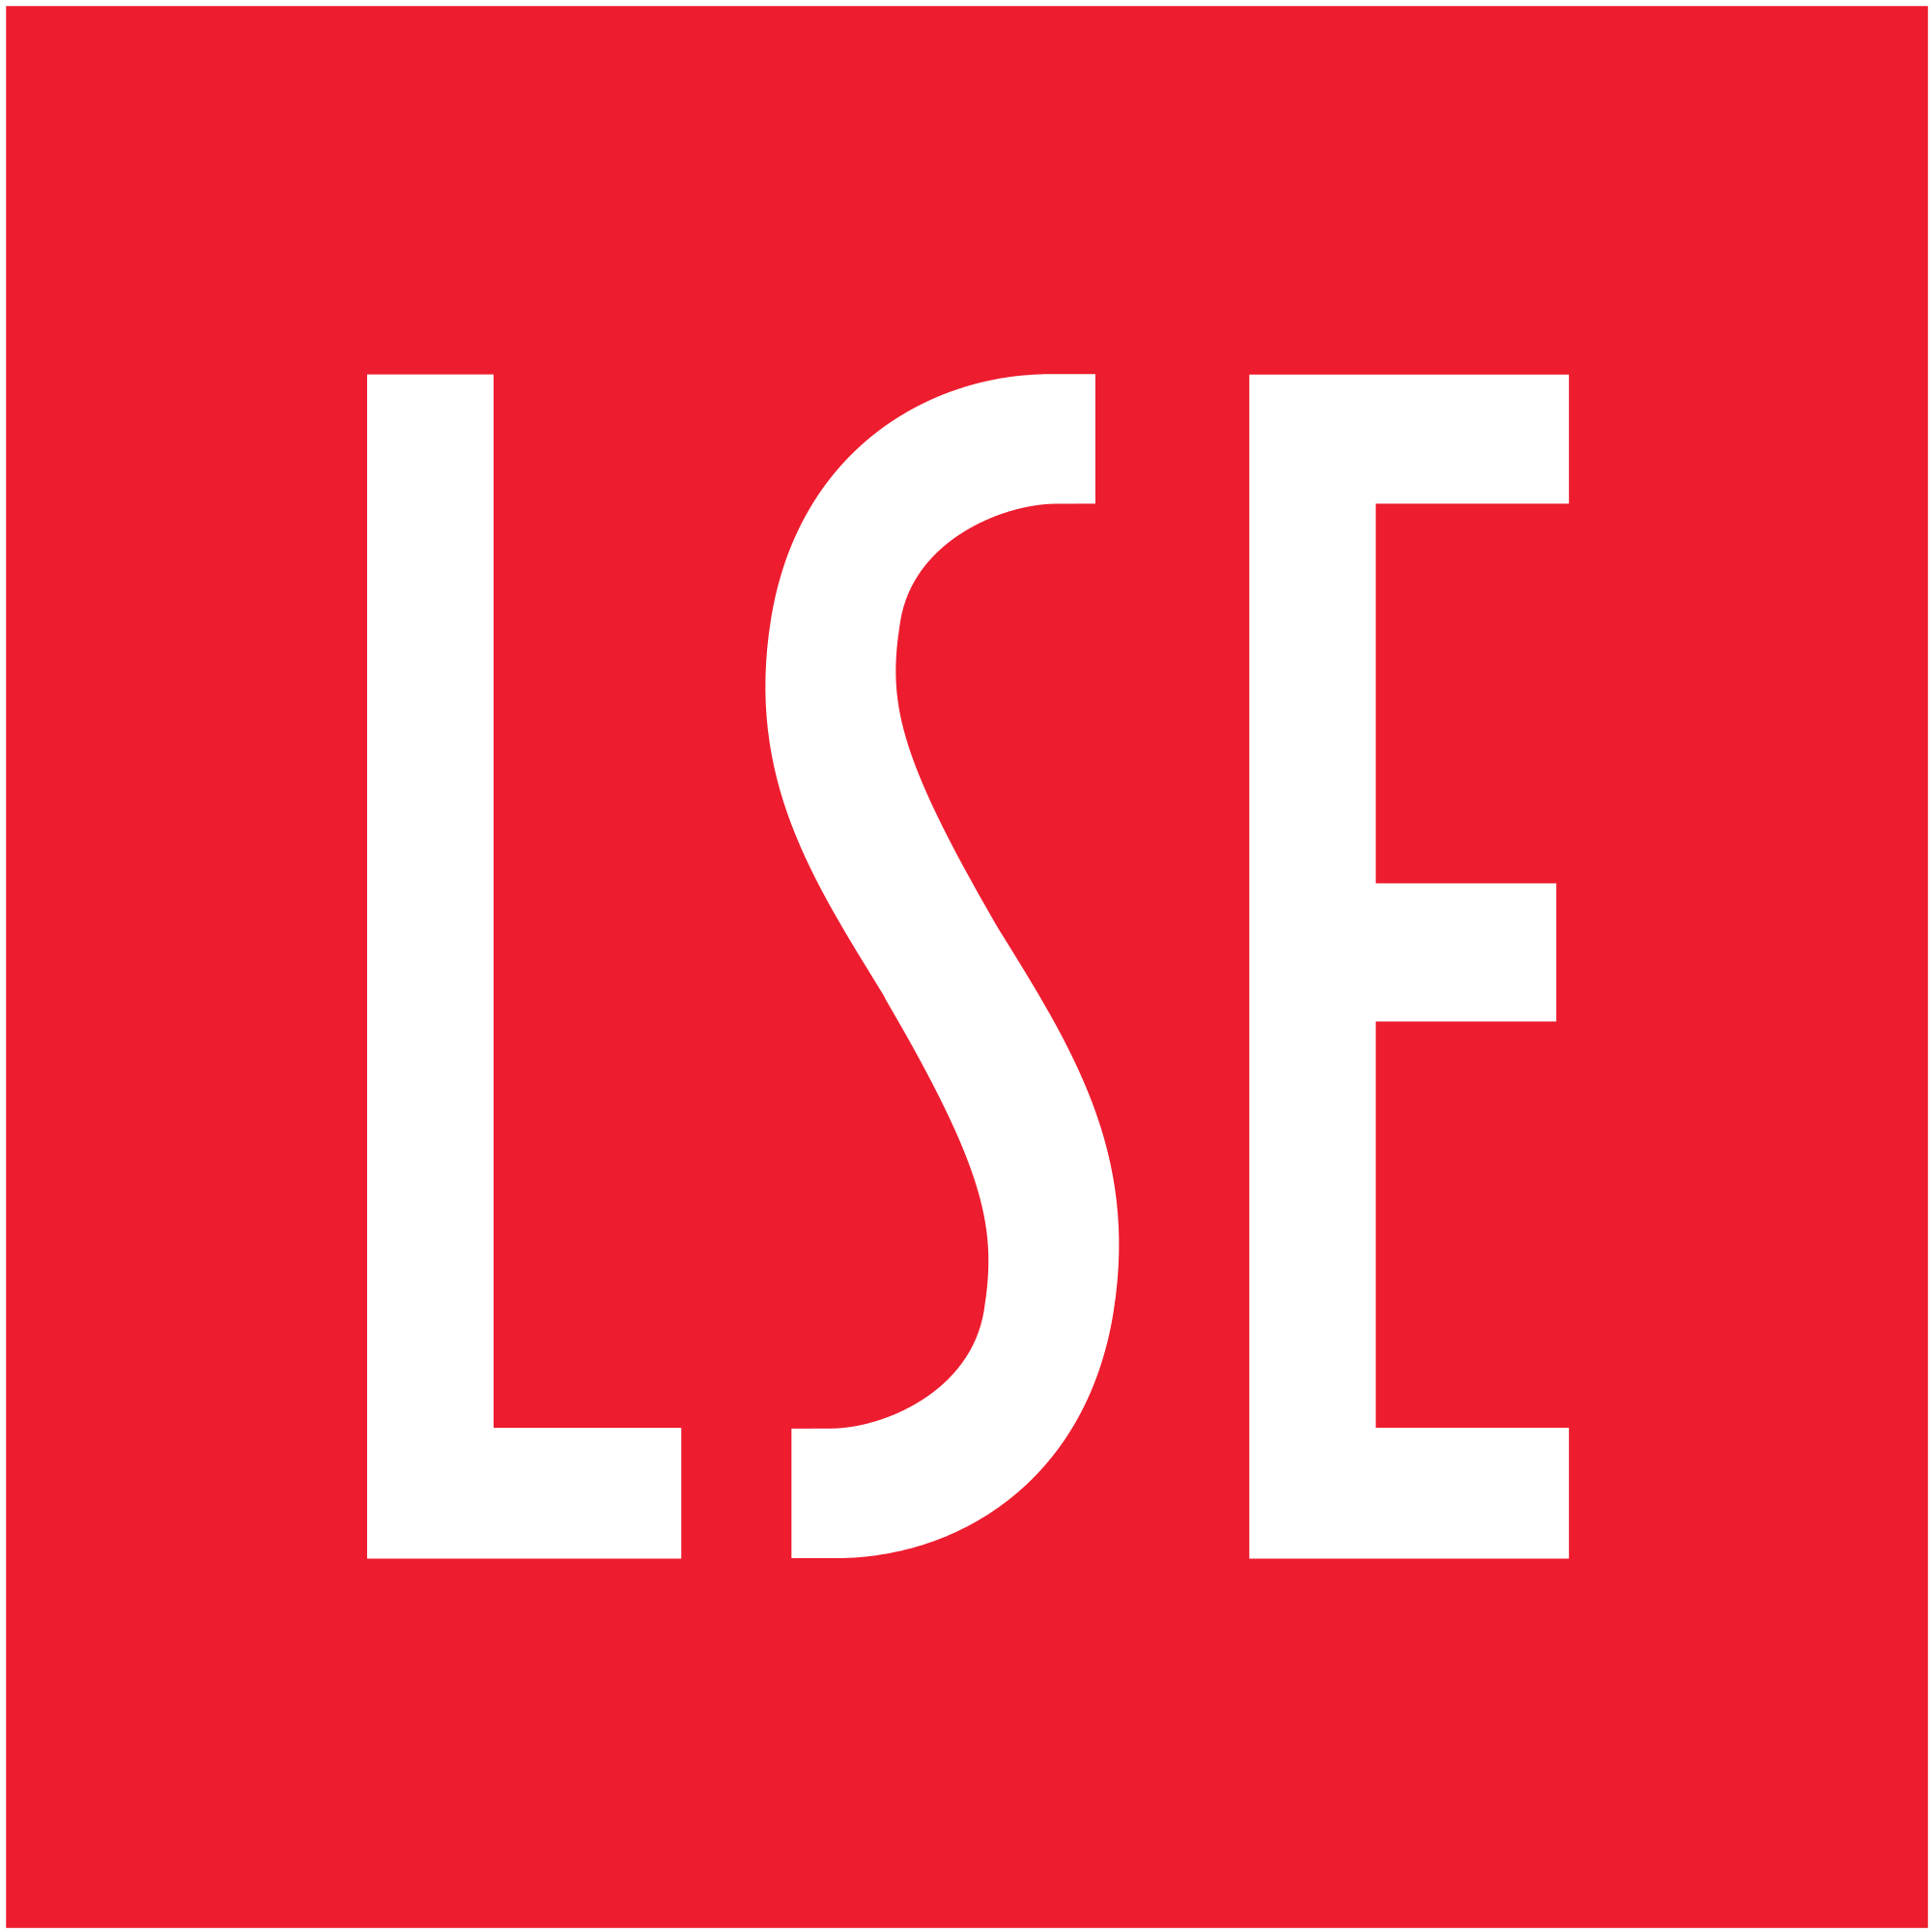 Statement on adding ex-Muslim to the LSE Atheist, Secularist, and Humanist Society name